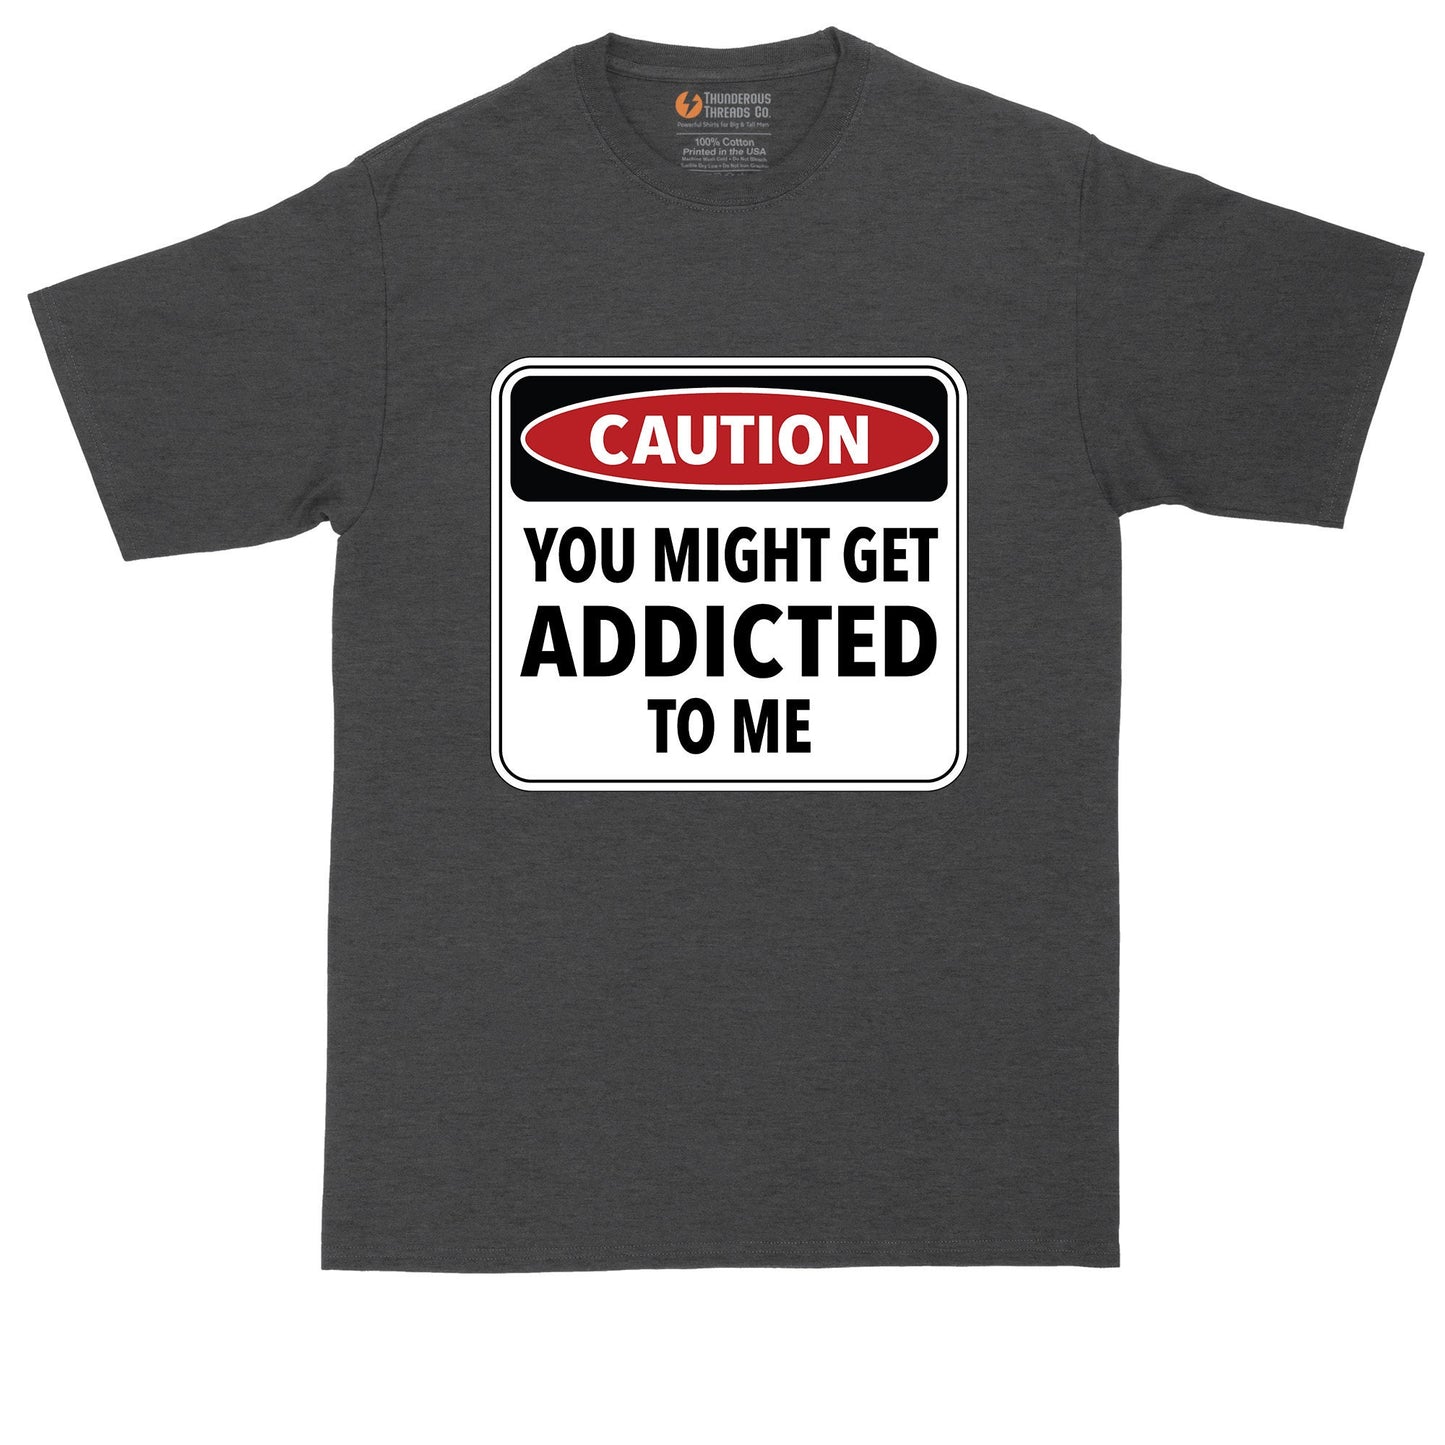 Big and Tall Men | Caution You Might Get Addicted to Me | Mens Big and Tall Graphic T-Shirt | Shirts for Big Guys